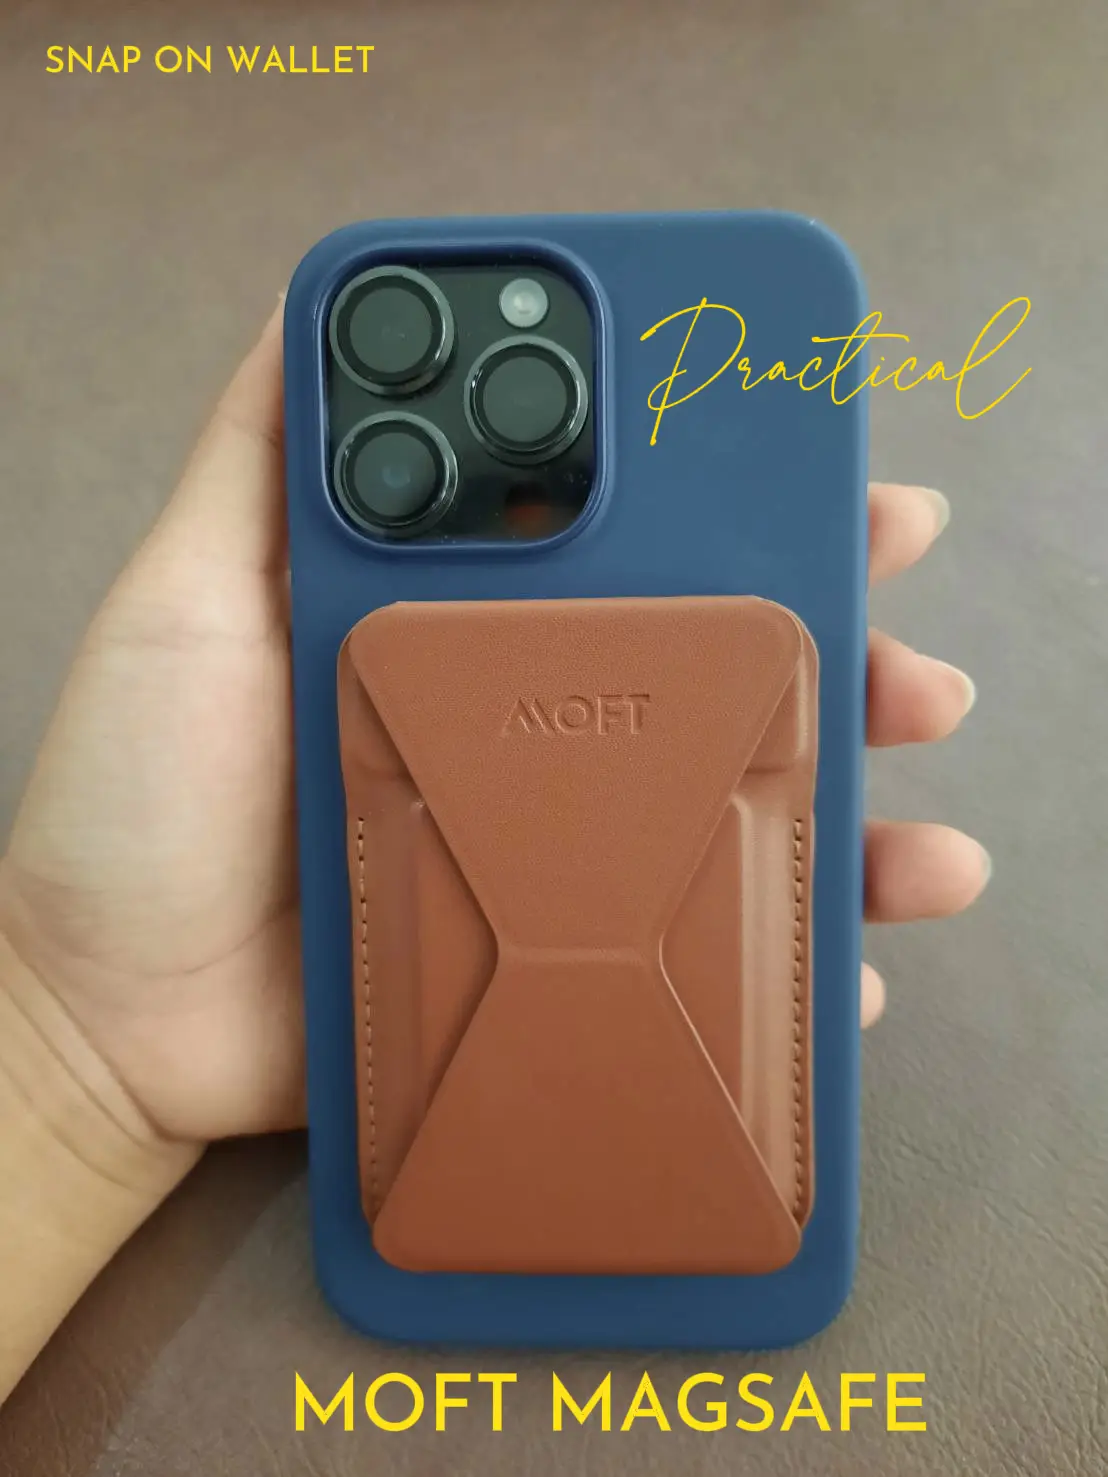 MOFT MagSafe iPhone Wallet and Stand Review